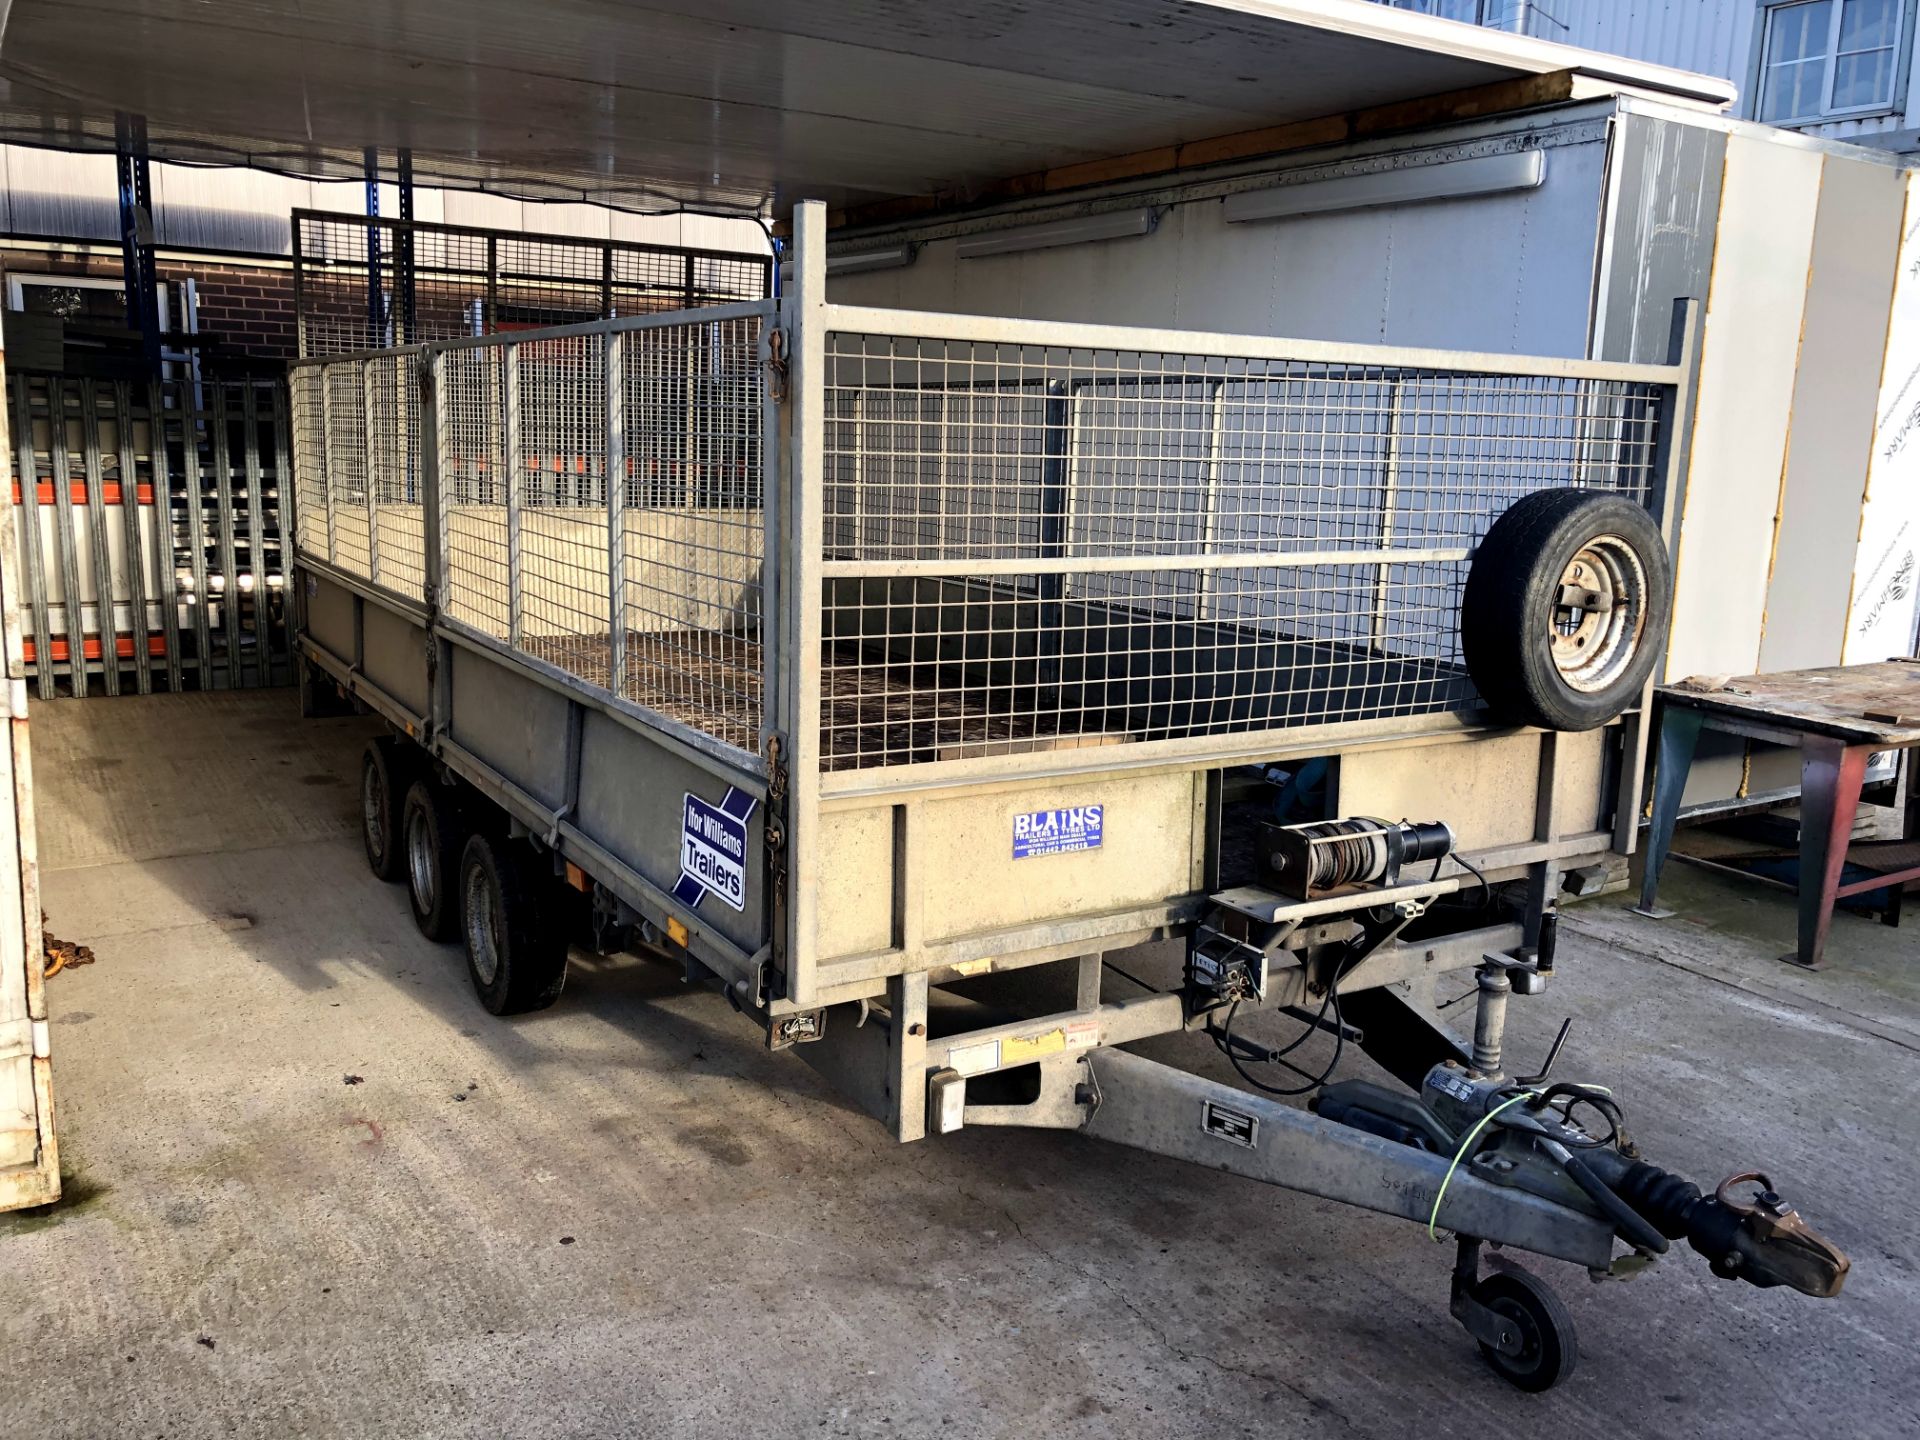 RARE 2005 IFOR WILLIAMS LM167G3 3.5T TRI-AXLE TRAILER ALLOY SIDES, CAGE SIDES AND REAR RAMP